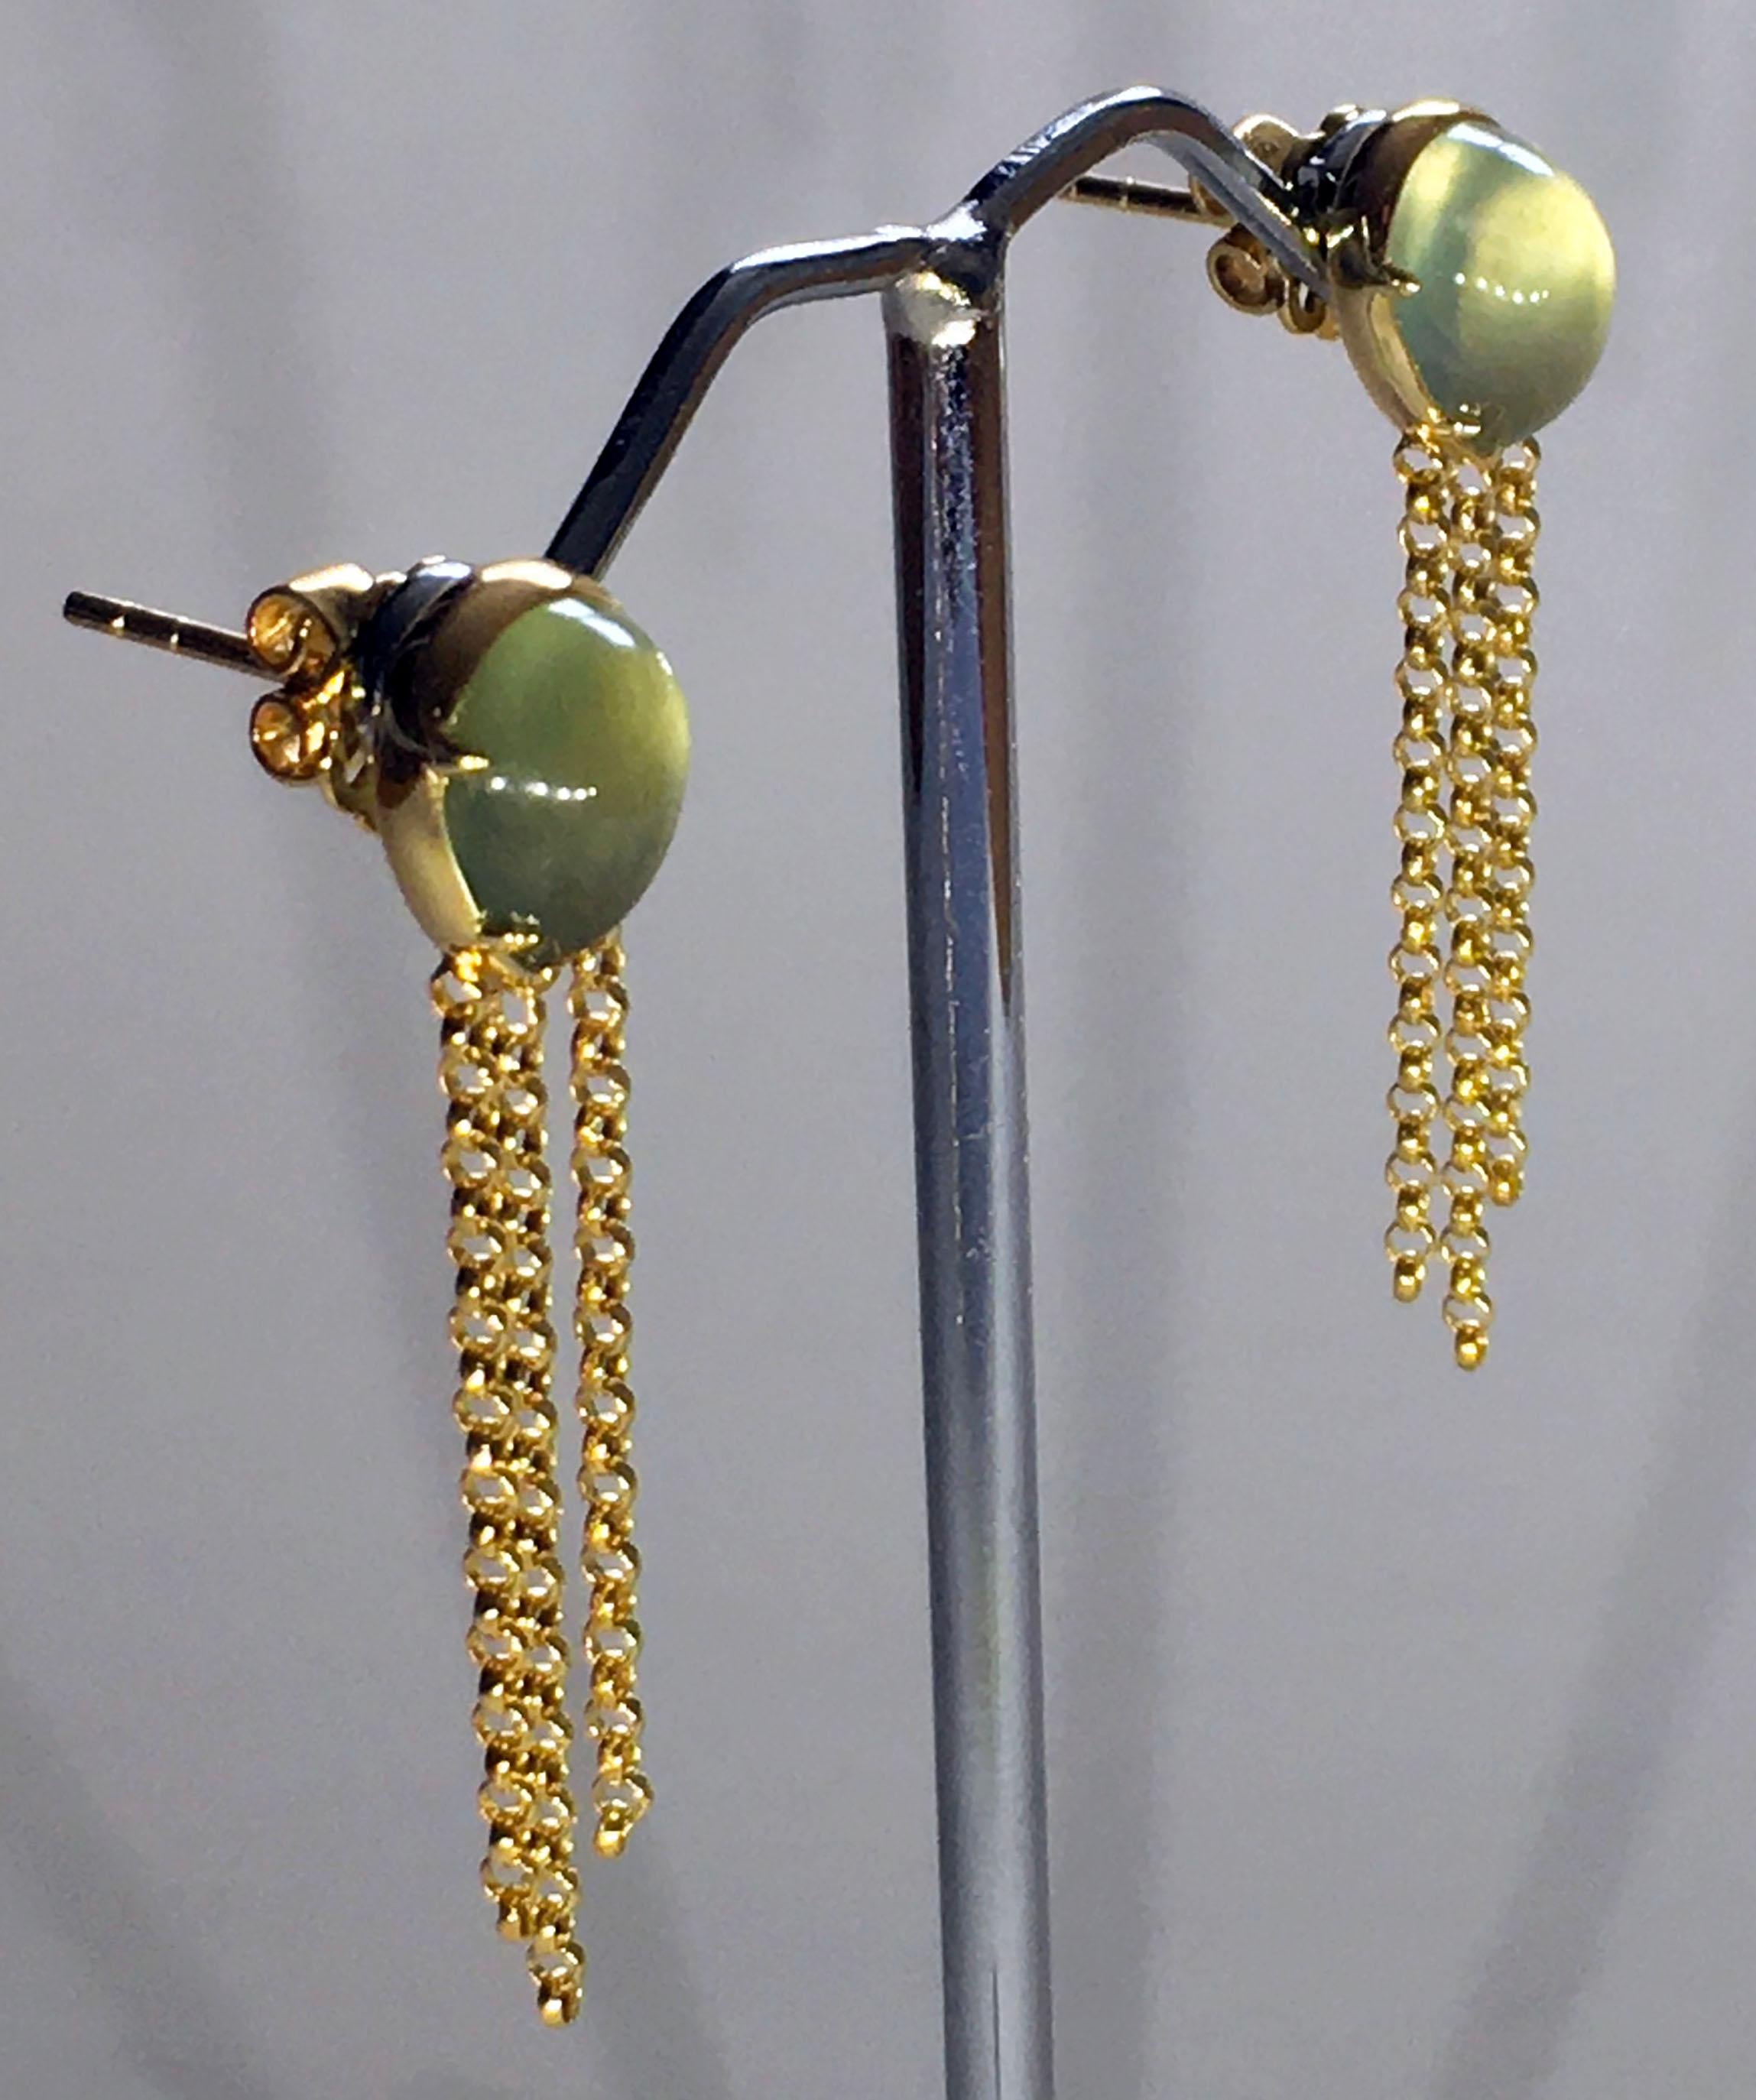 Classical Roman 18kt Gold Dangle Earrings set with Prehnite Cabochons 2